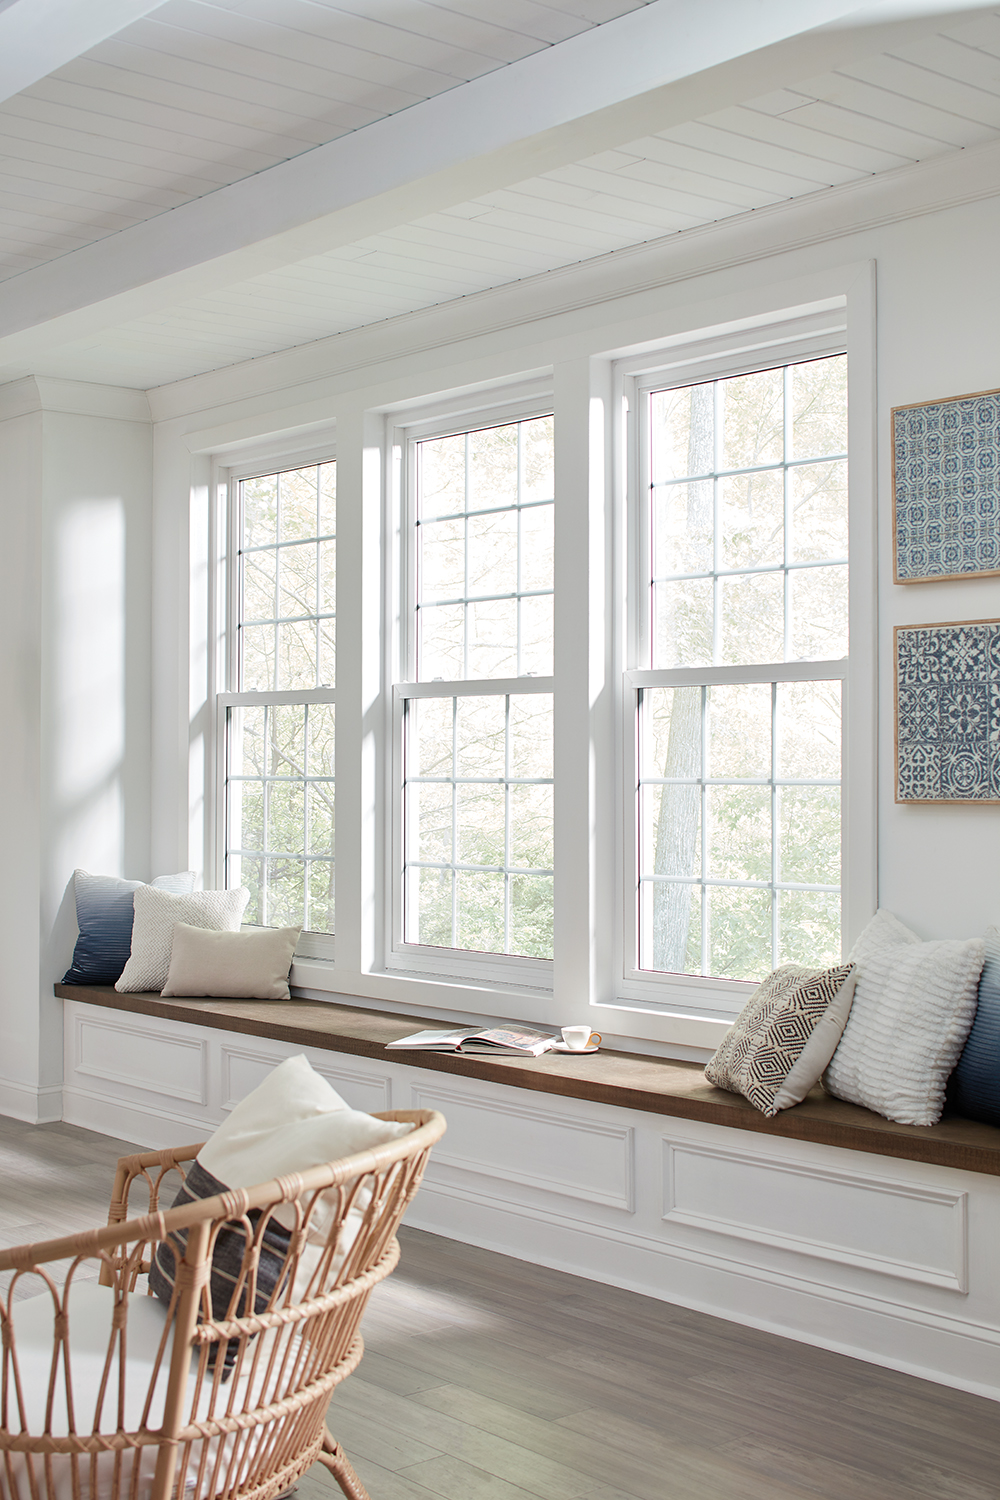 Regency Nordic White double hung windows with Nordic White colonial grids